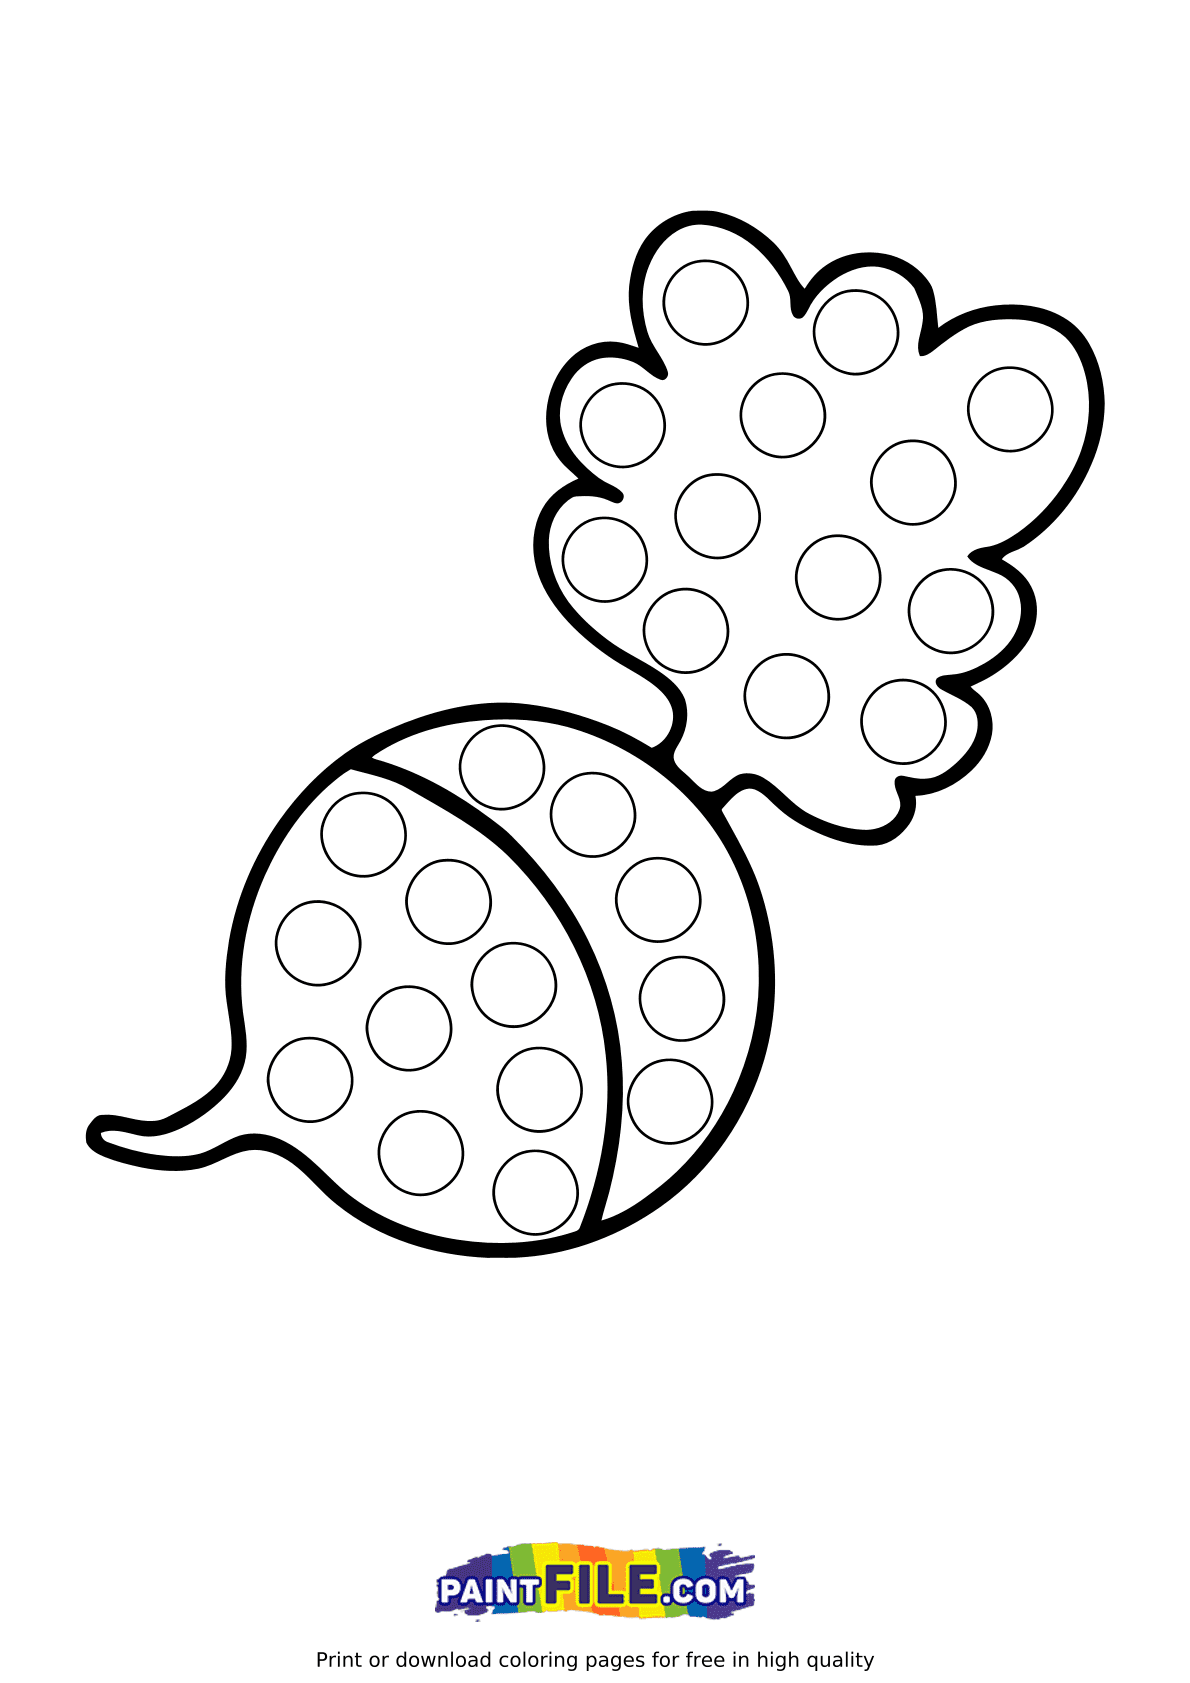 Radish Pop It Coloring Pages